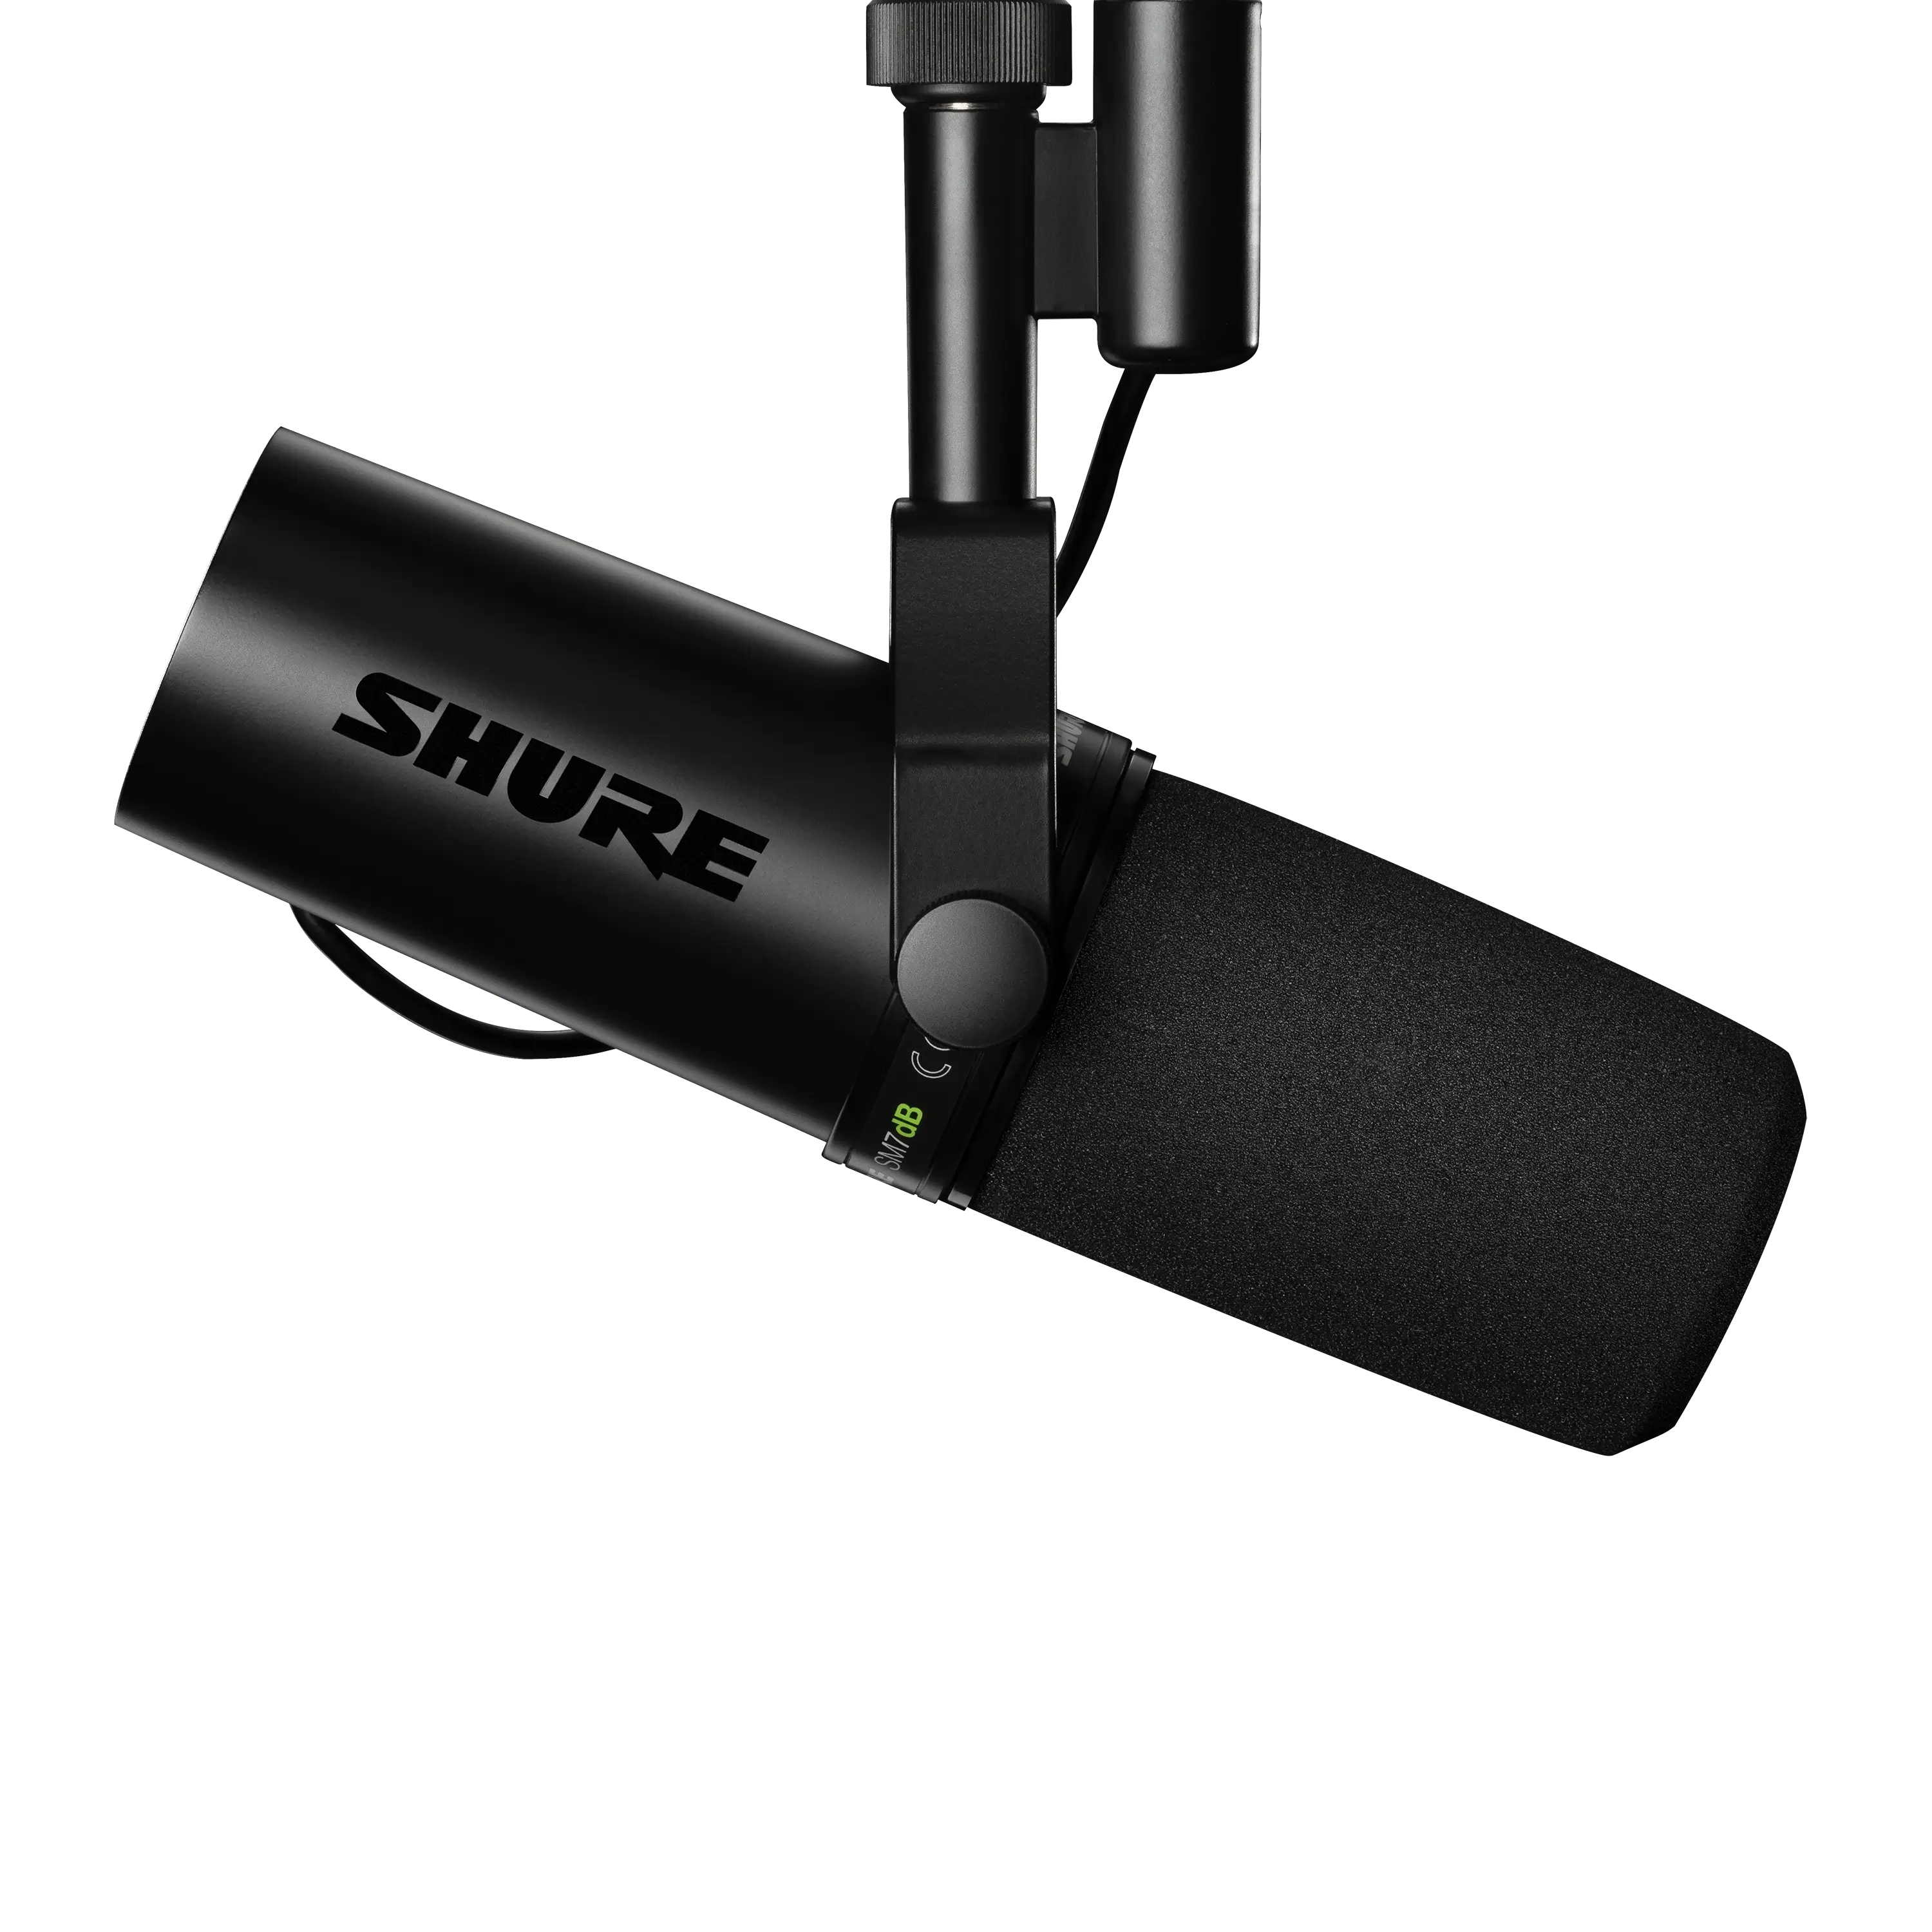 Shure SM7B Vocal Dynamic Microphone for Broadcast, Podcast & Recording, XLR  Studio Mic for Music & Speech, Wide-Range Frequency, Warm & Smooth Sound,  Rugged Construction, Detachable Windscreen - Black 